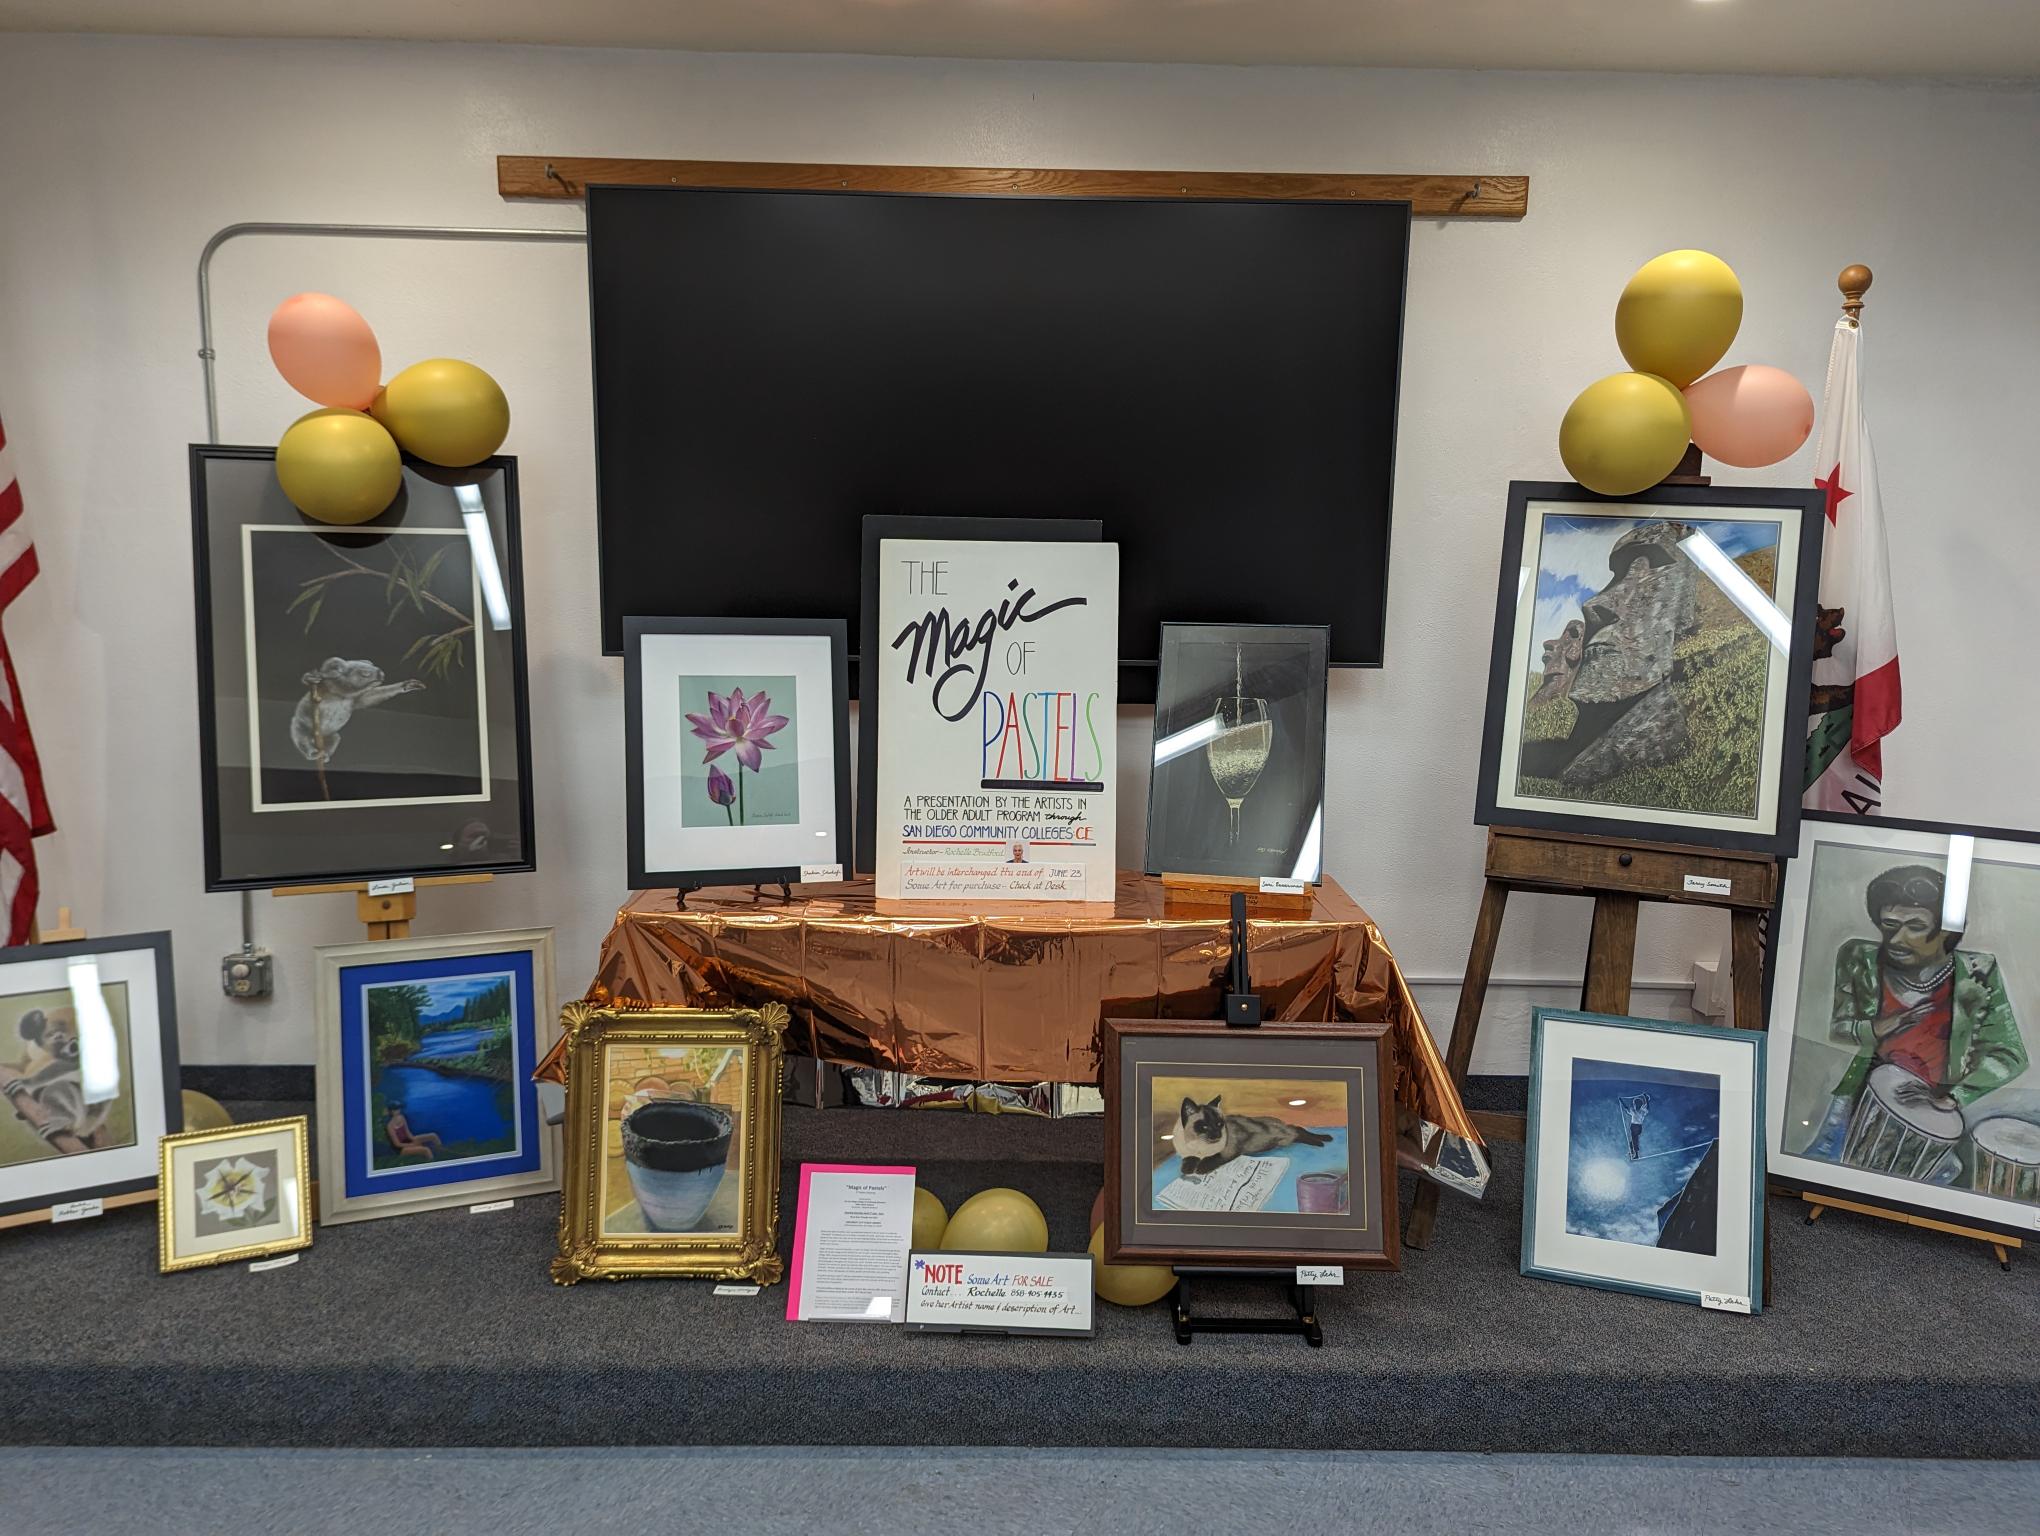 A display of pastel works including portraits, landscapes, and still lifes surrounding a sign with the title of the exhibition.  The sign reads "The Magic of Pastels. A presentation by the artists in the older adult program through San Diego Community College Continuing Education. Instructor Rochelle Bradford.